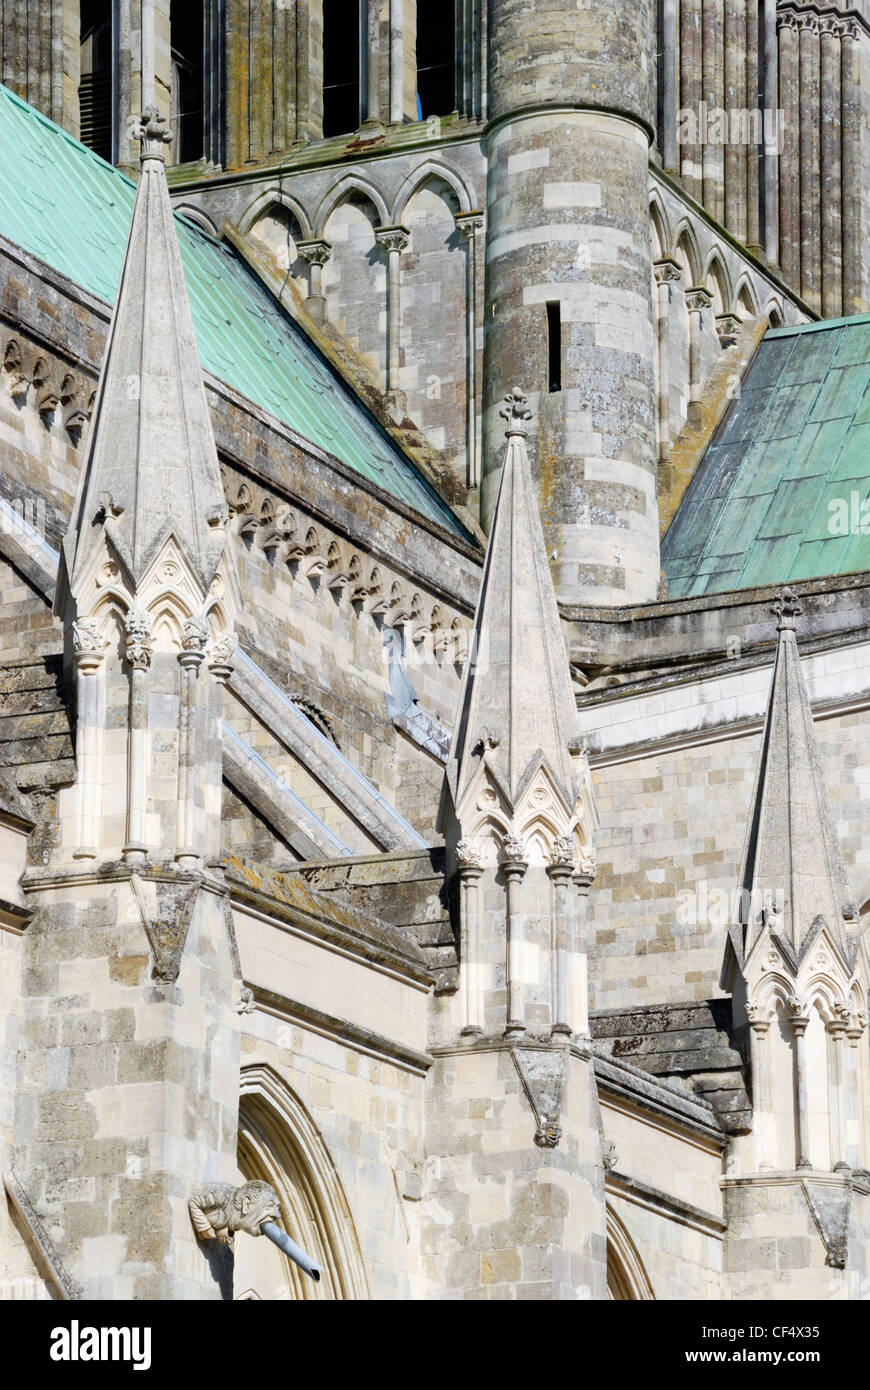 The Gothic style architecture of the exterior of Chichester Cathedral. Stock Photo